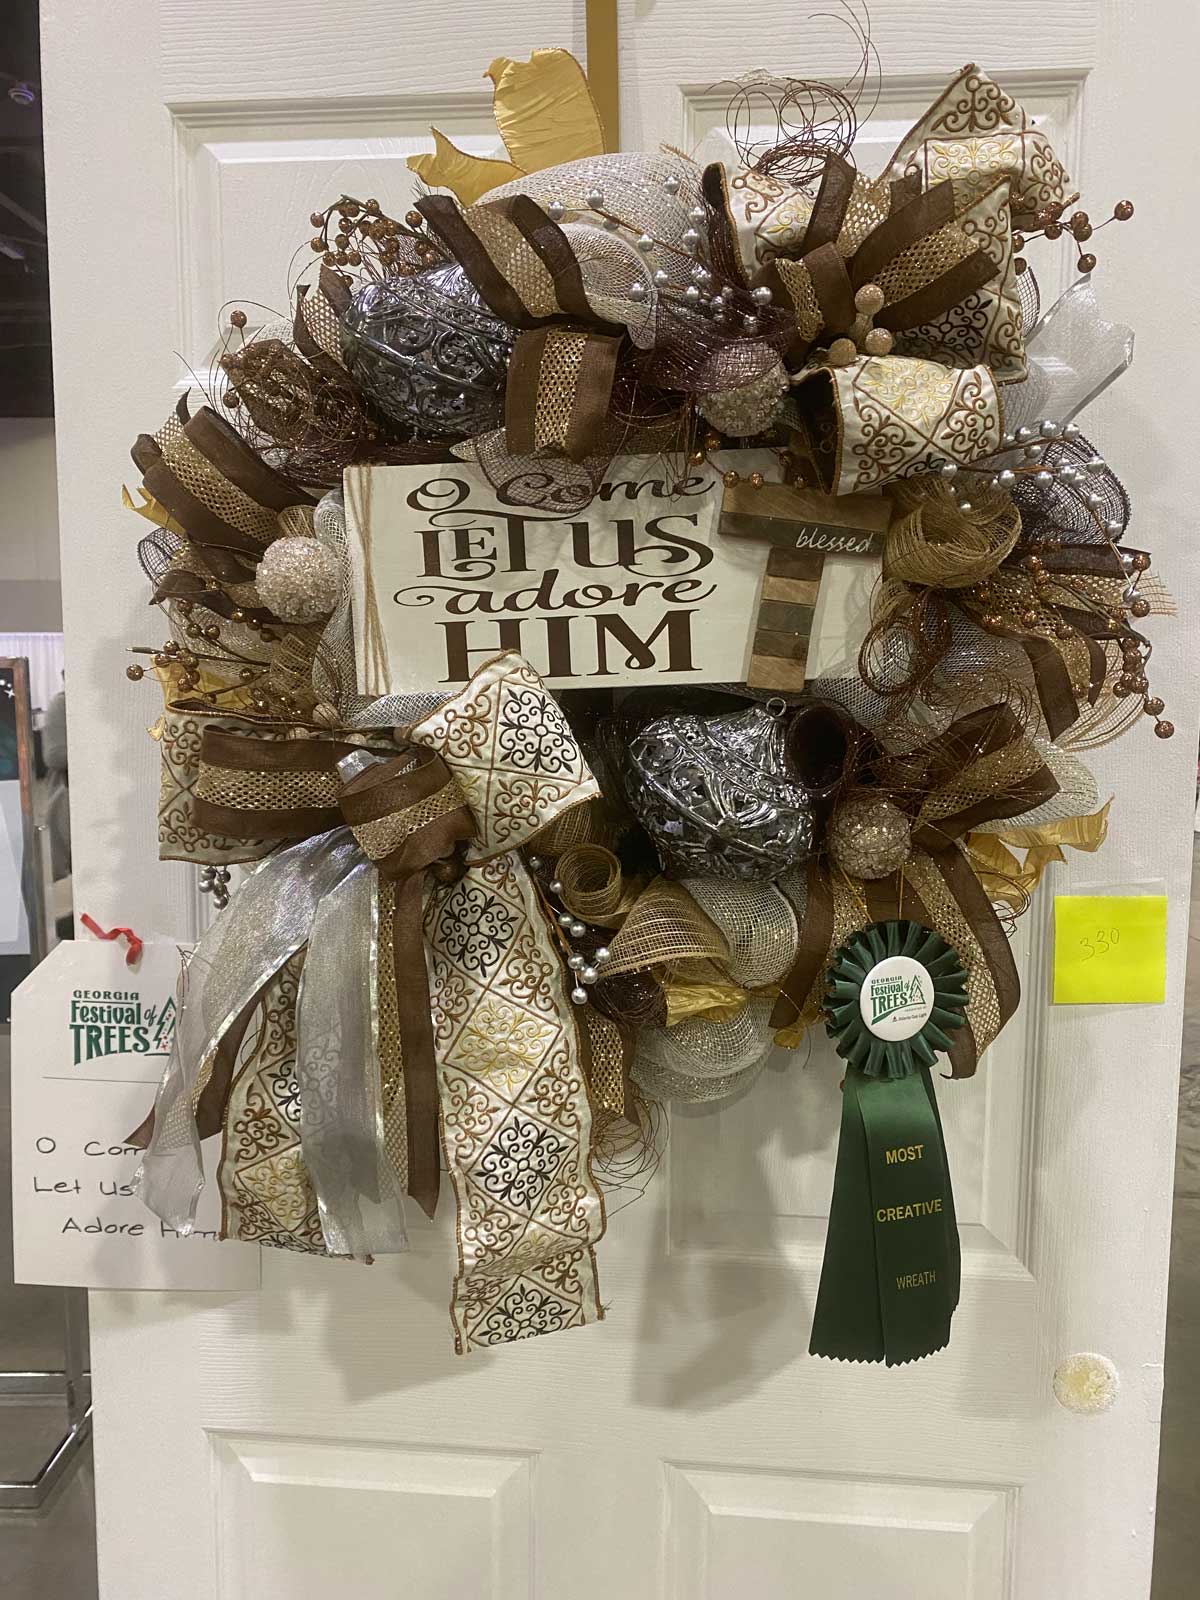 Most Creative - Wreath<br>“O Come Let Us Adore Him” by Ginger Balthazar